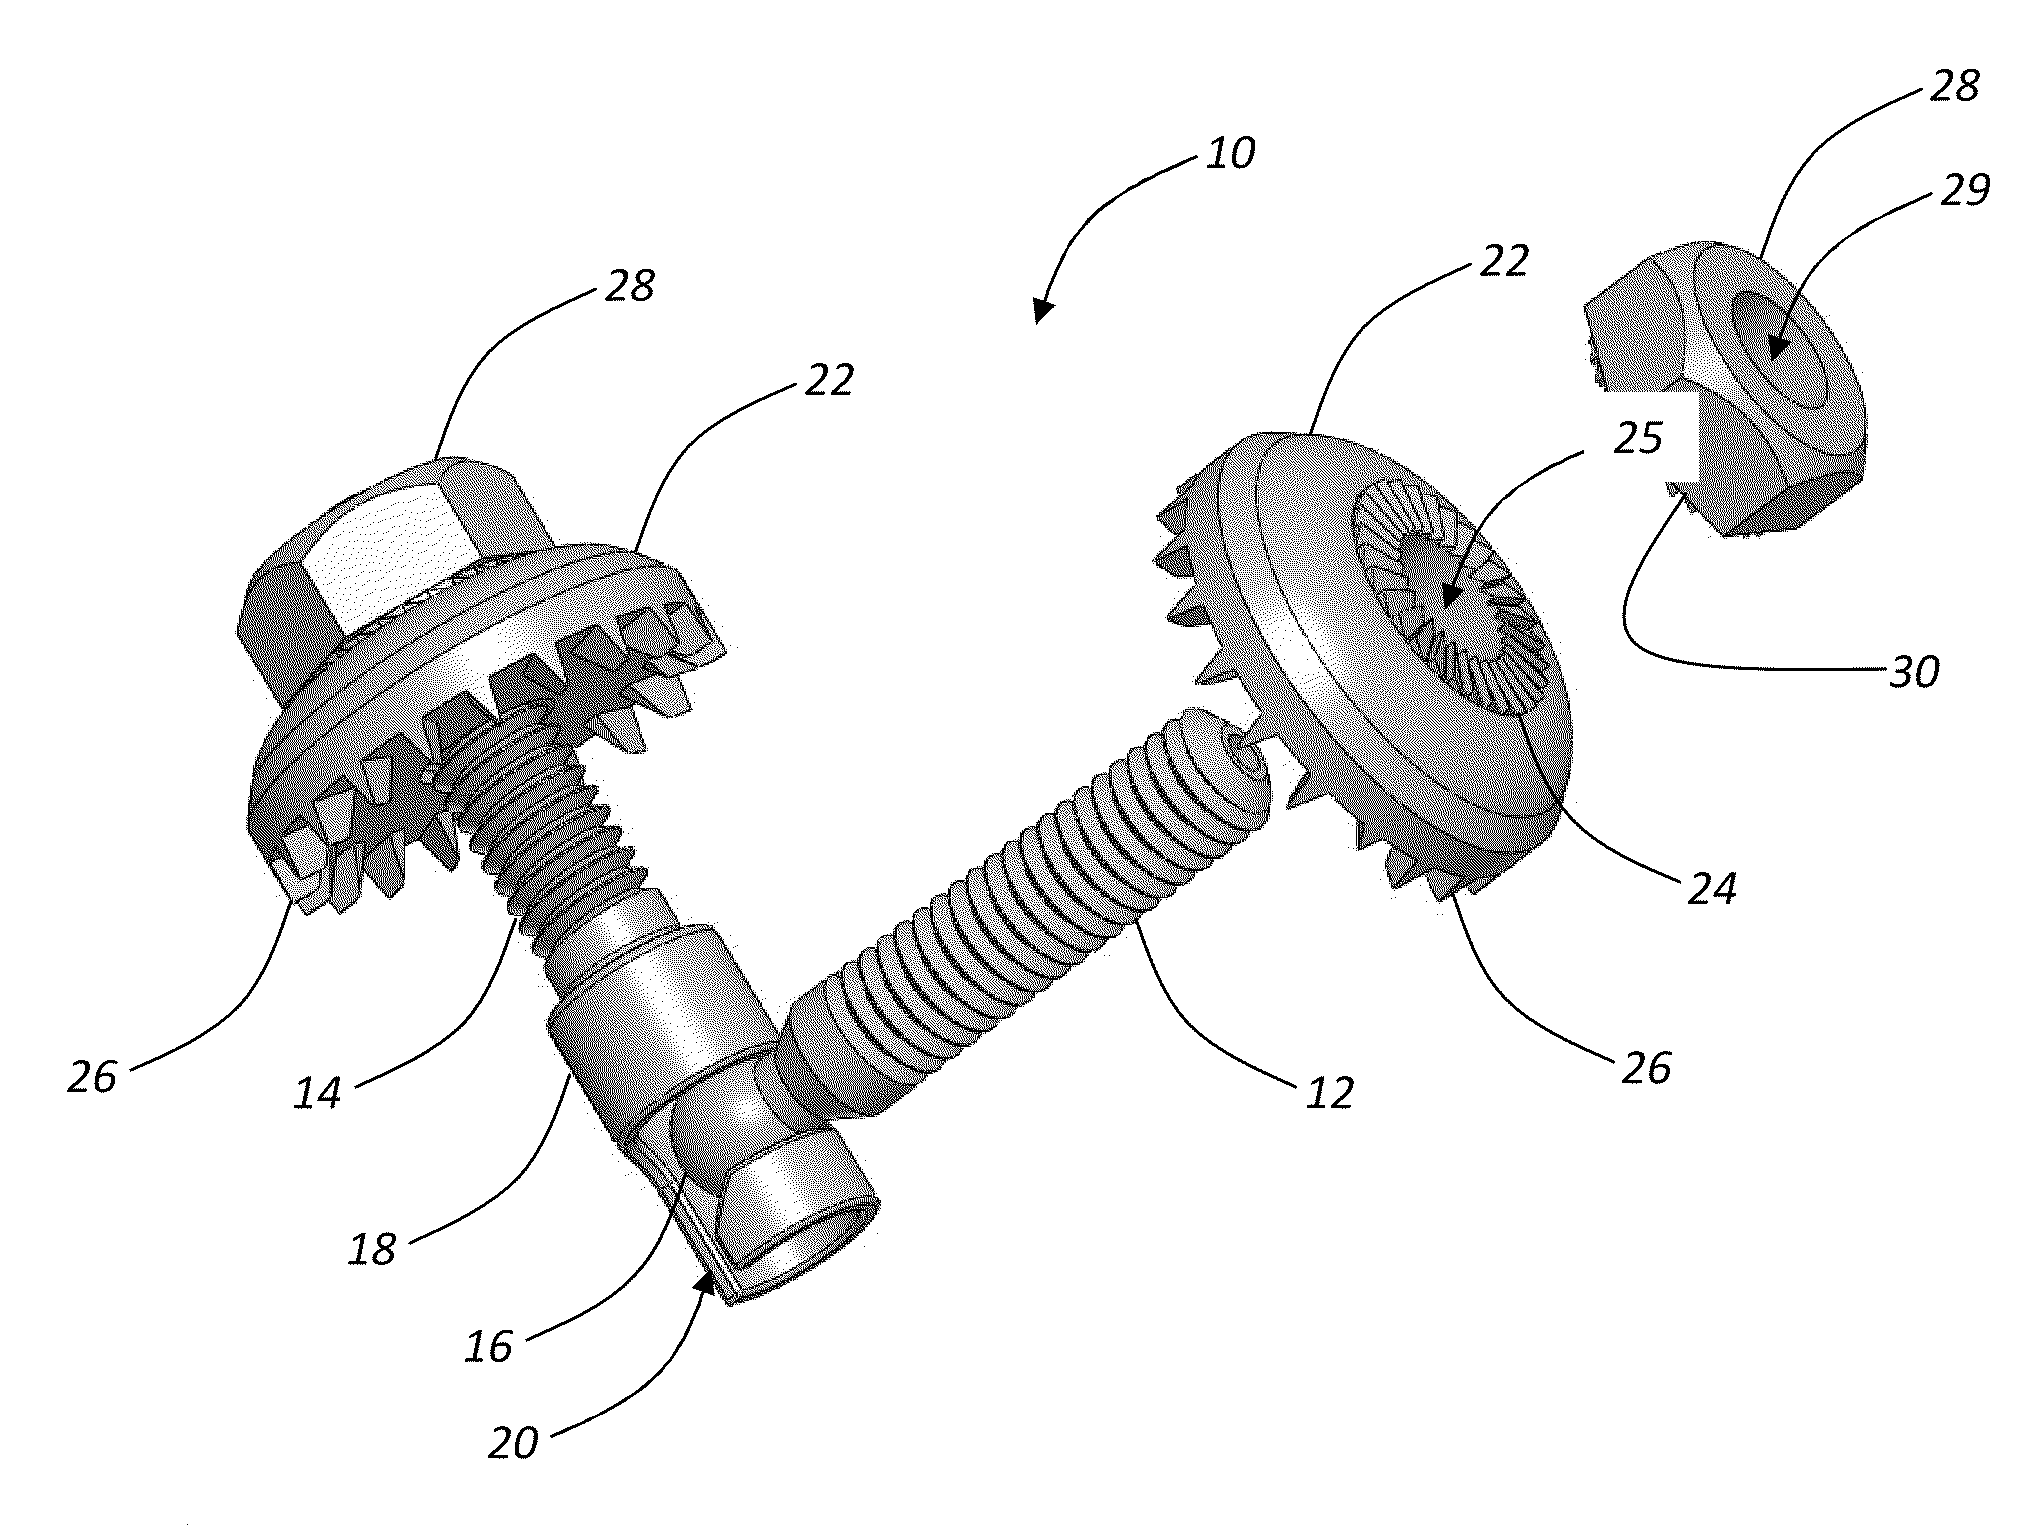 Transfacet fixation assembly and related surgical methods